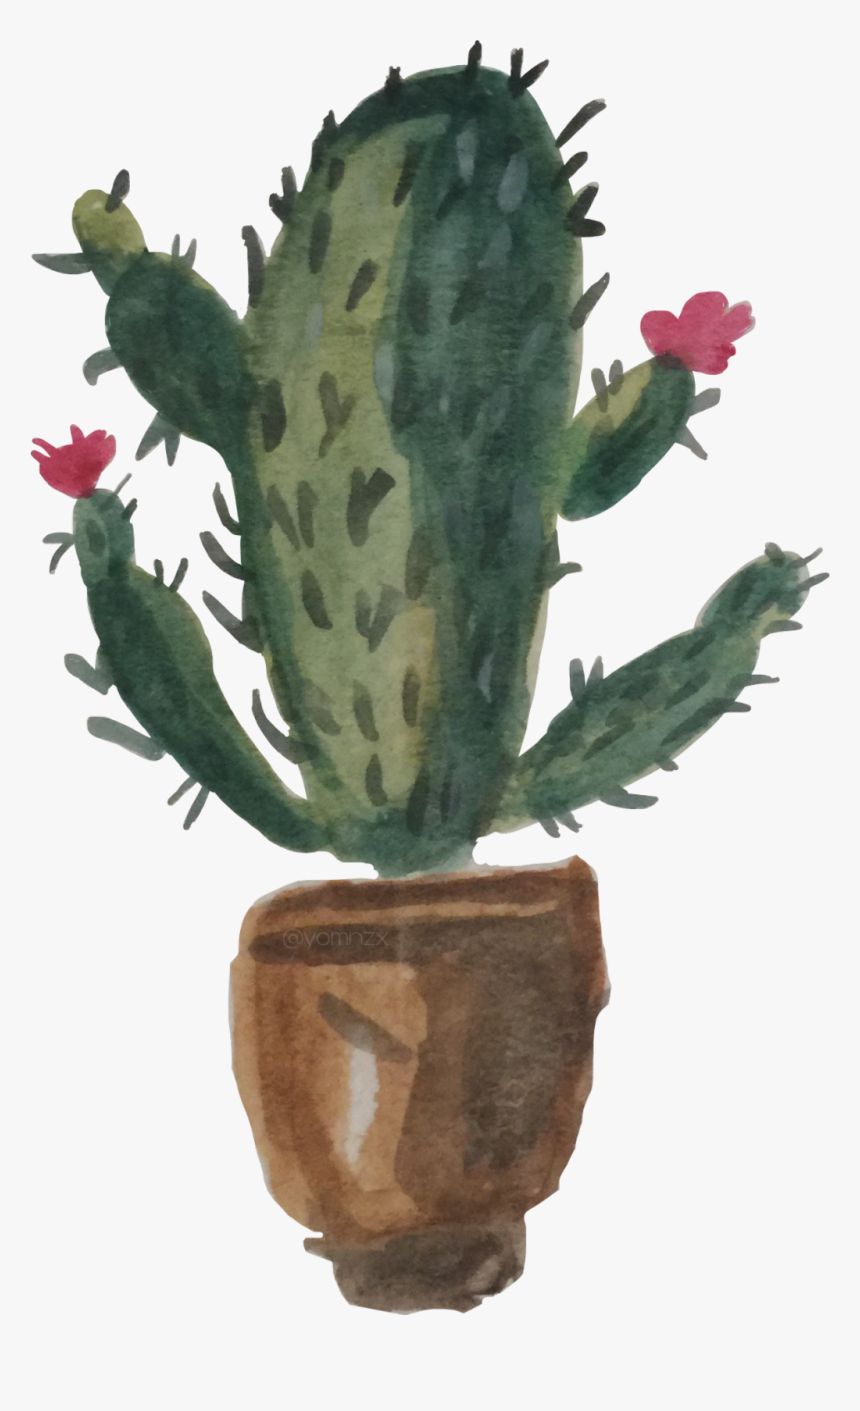 My Draw “cactus” I Turned It Into A Sticker Hope It, HD Png Download, Free Download